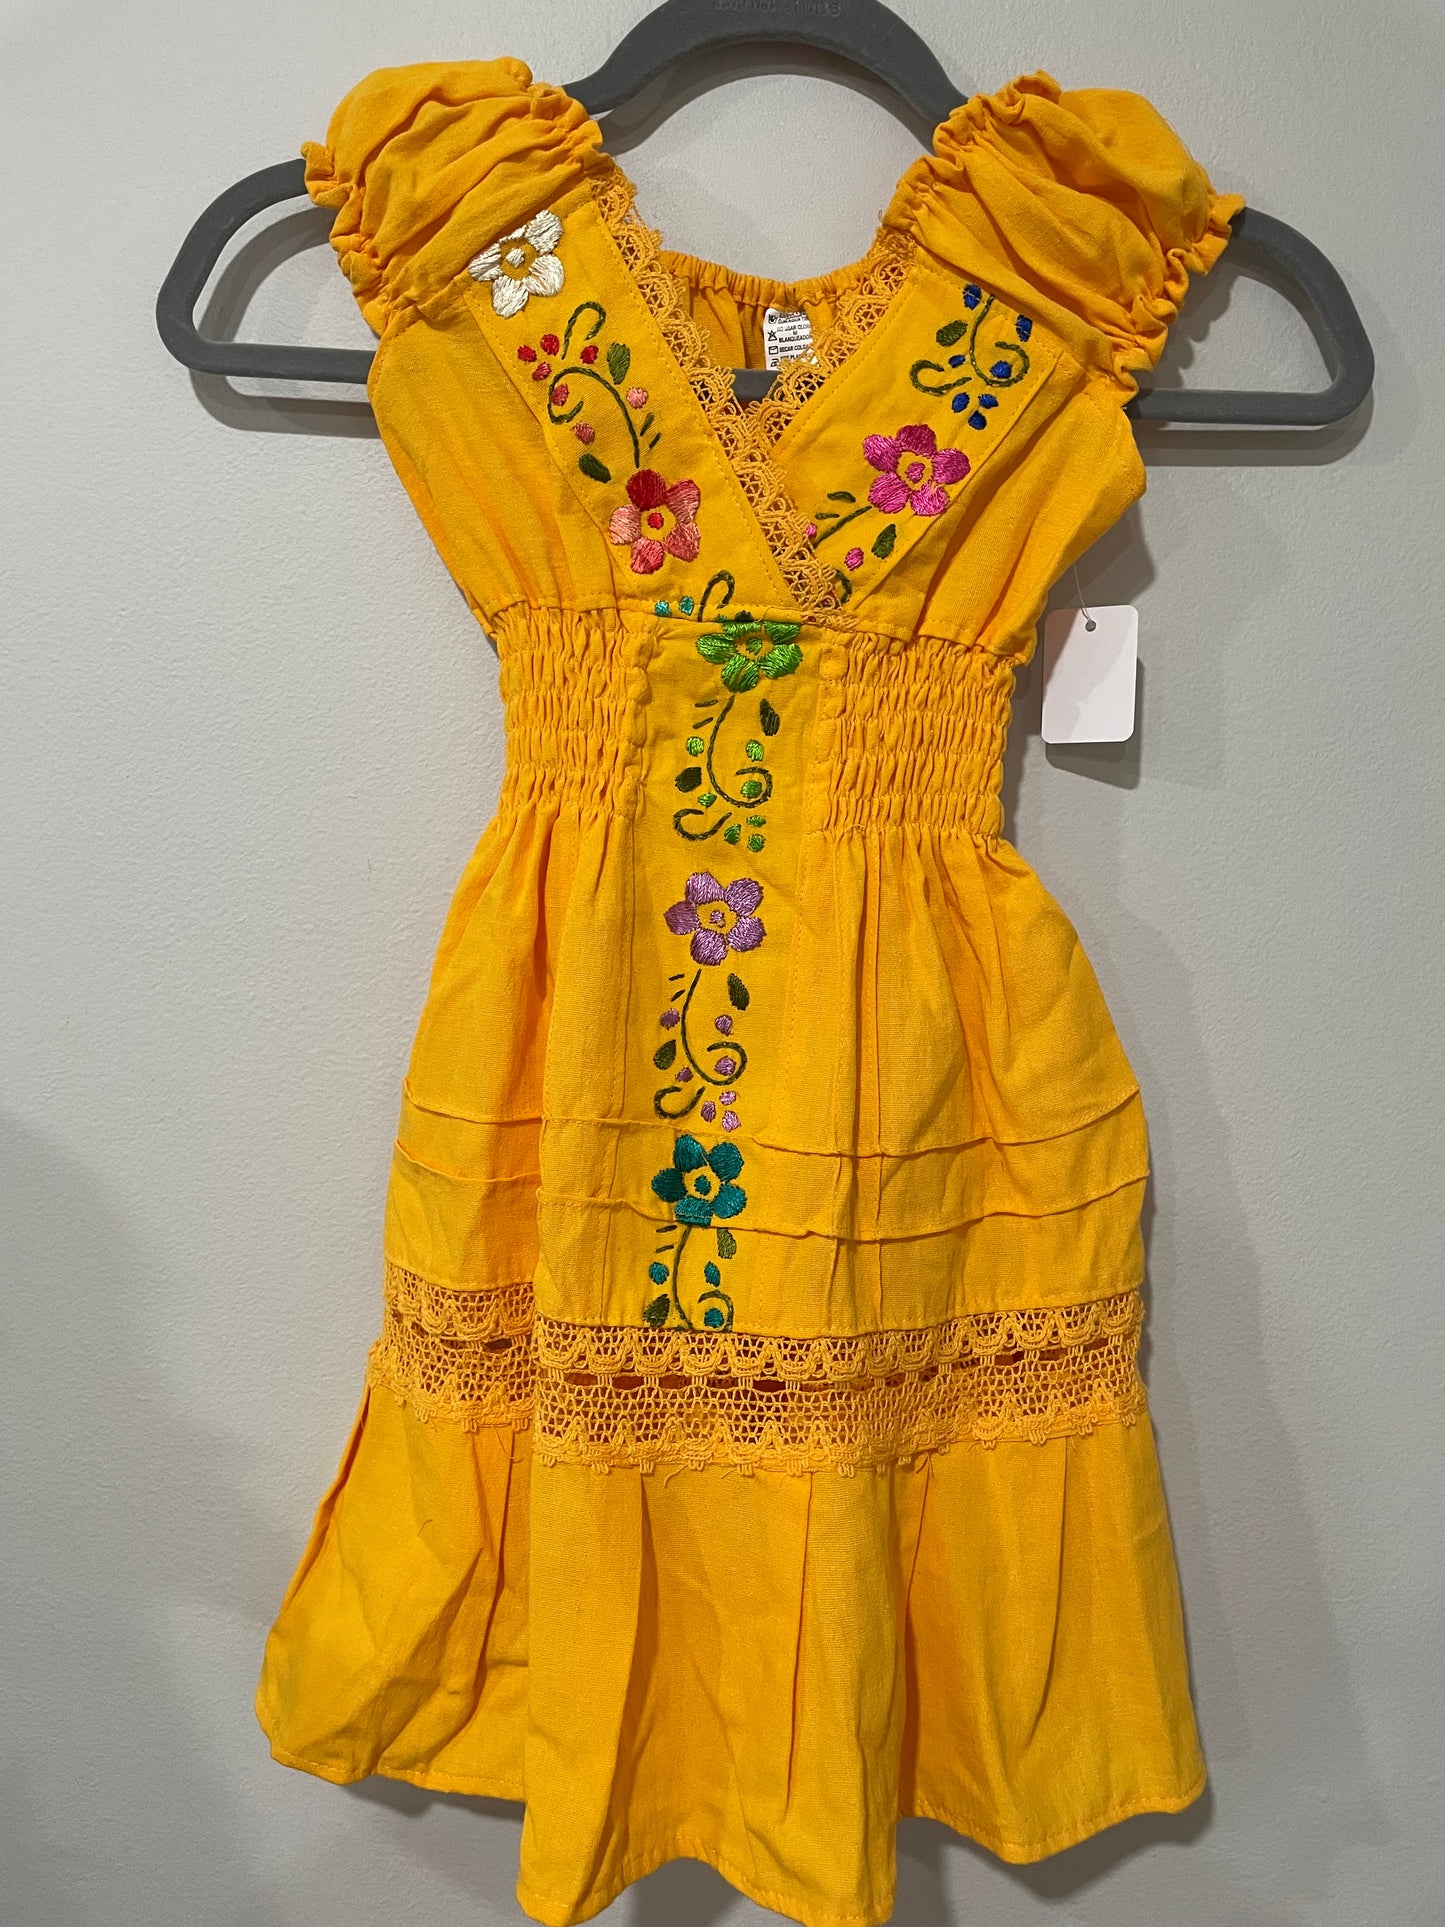 Girl’s Mexican dress